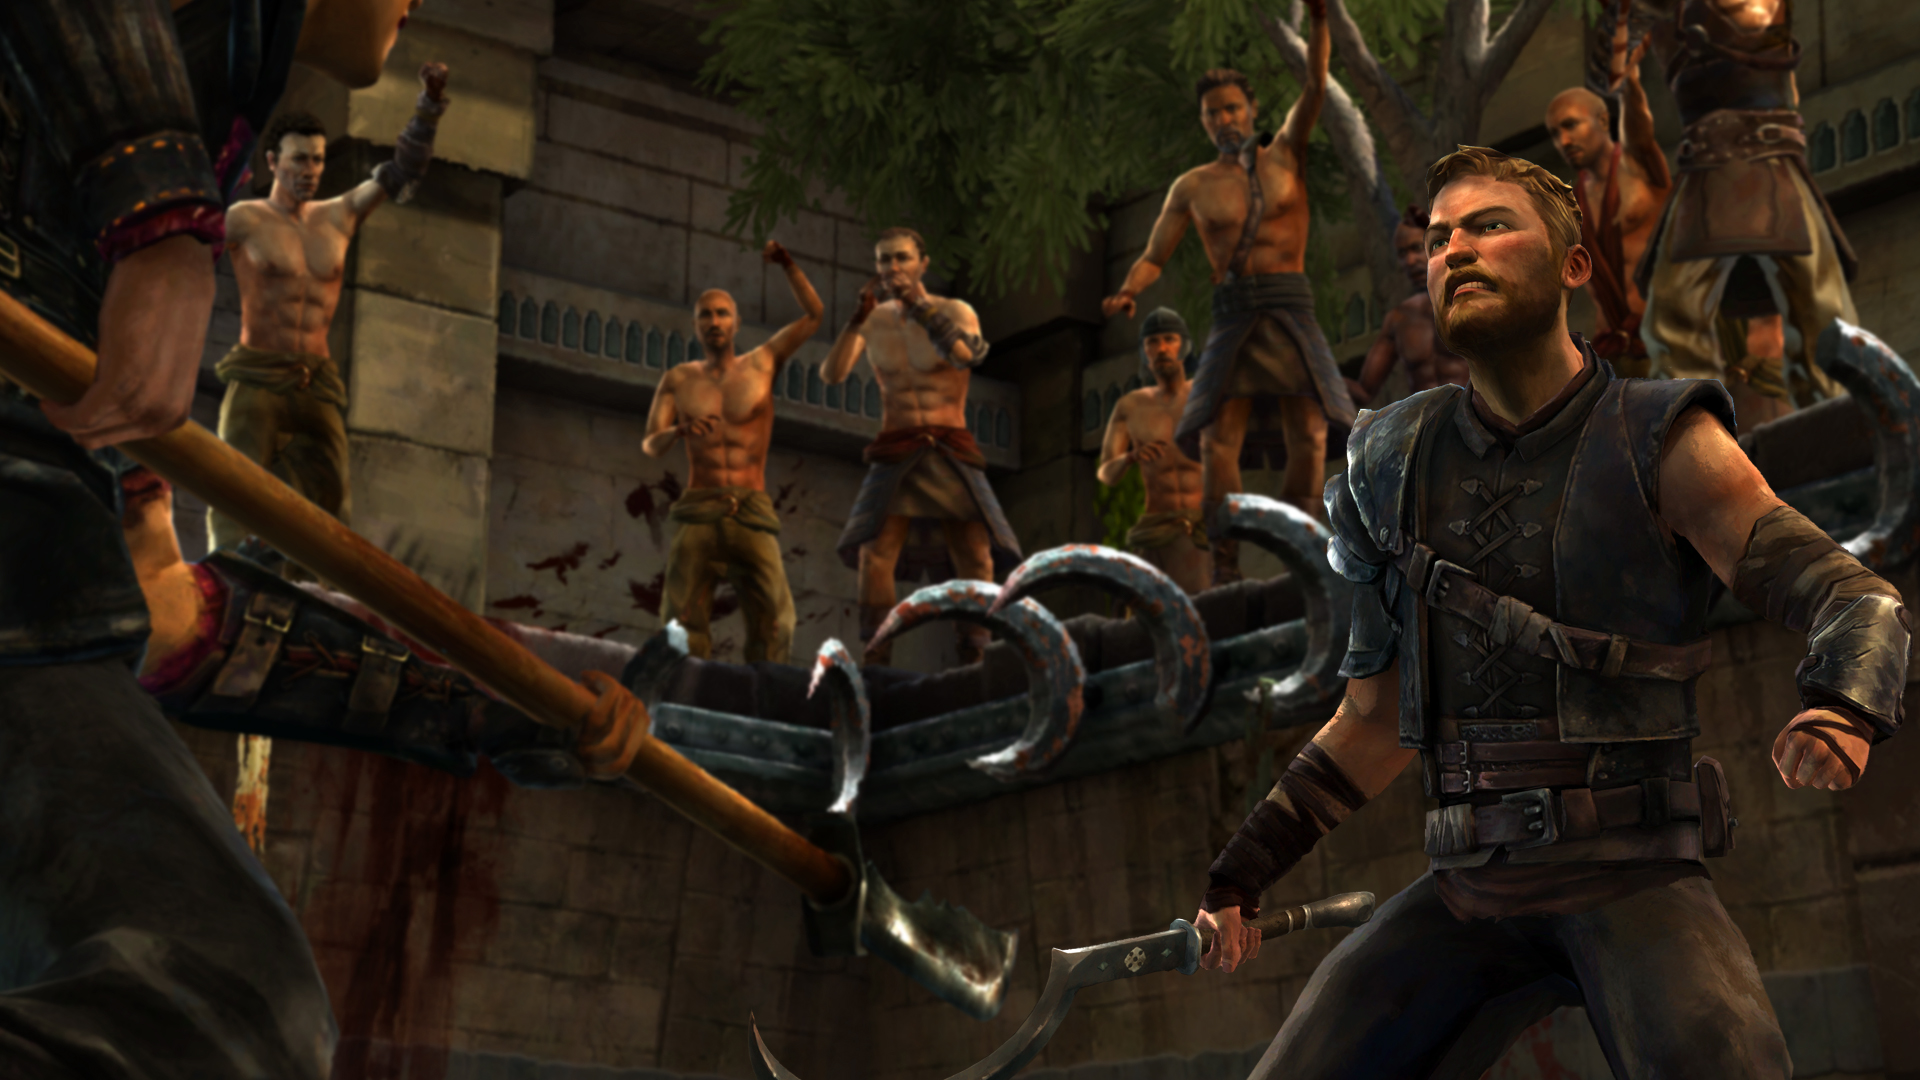 Game Of Thrones - A Telltale Games Series #15